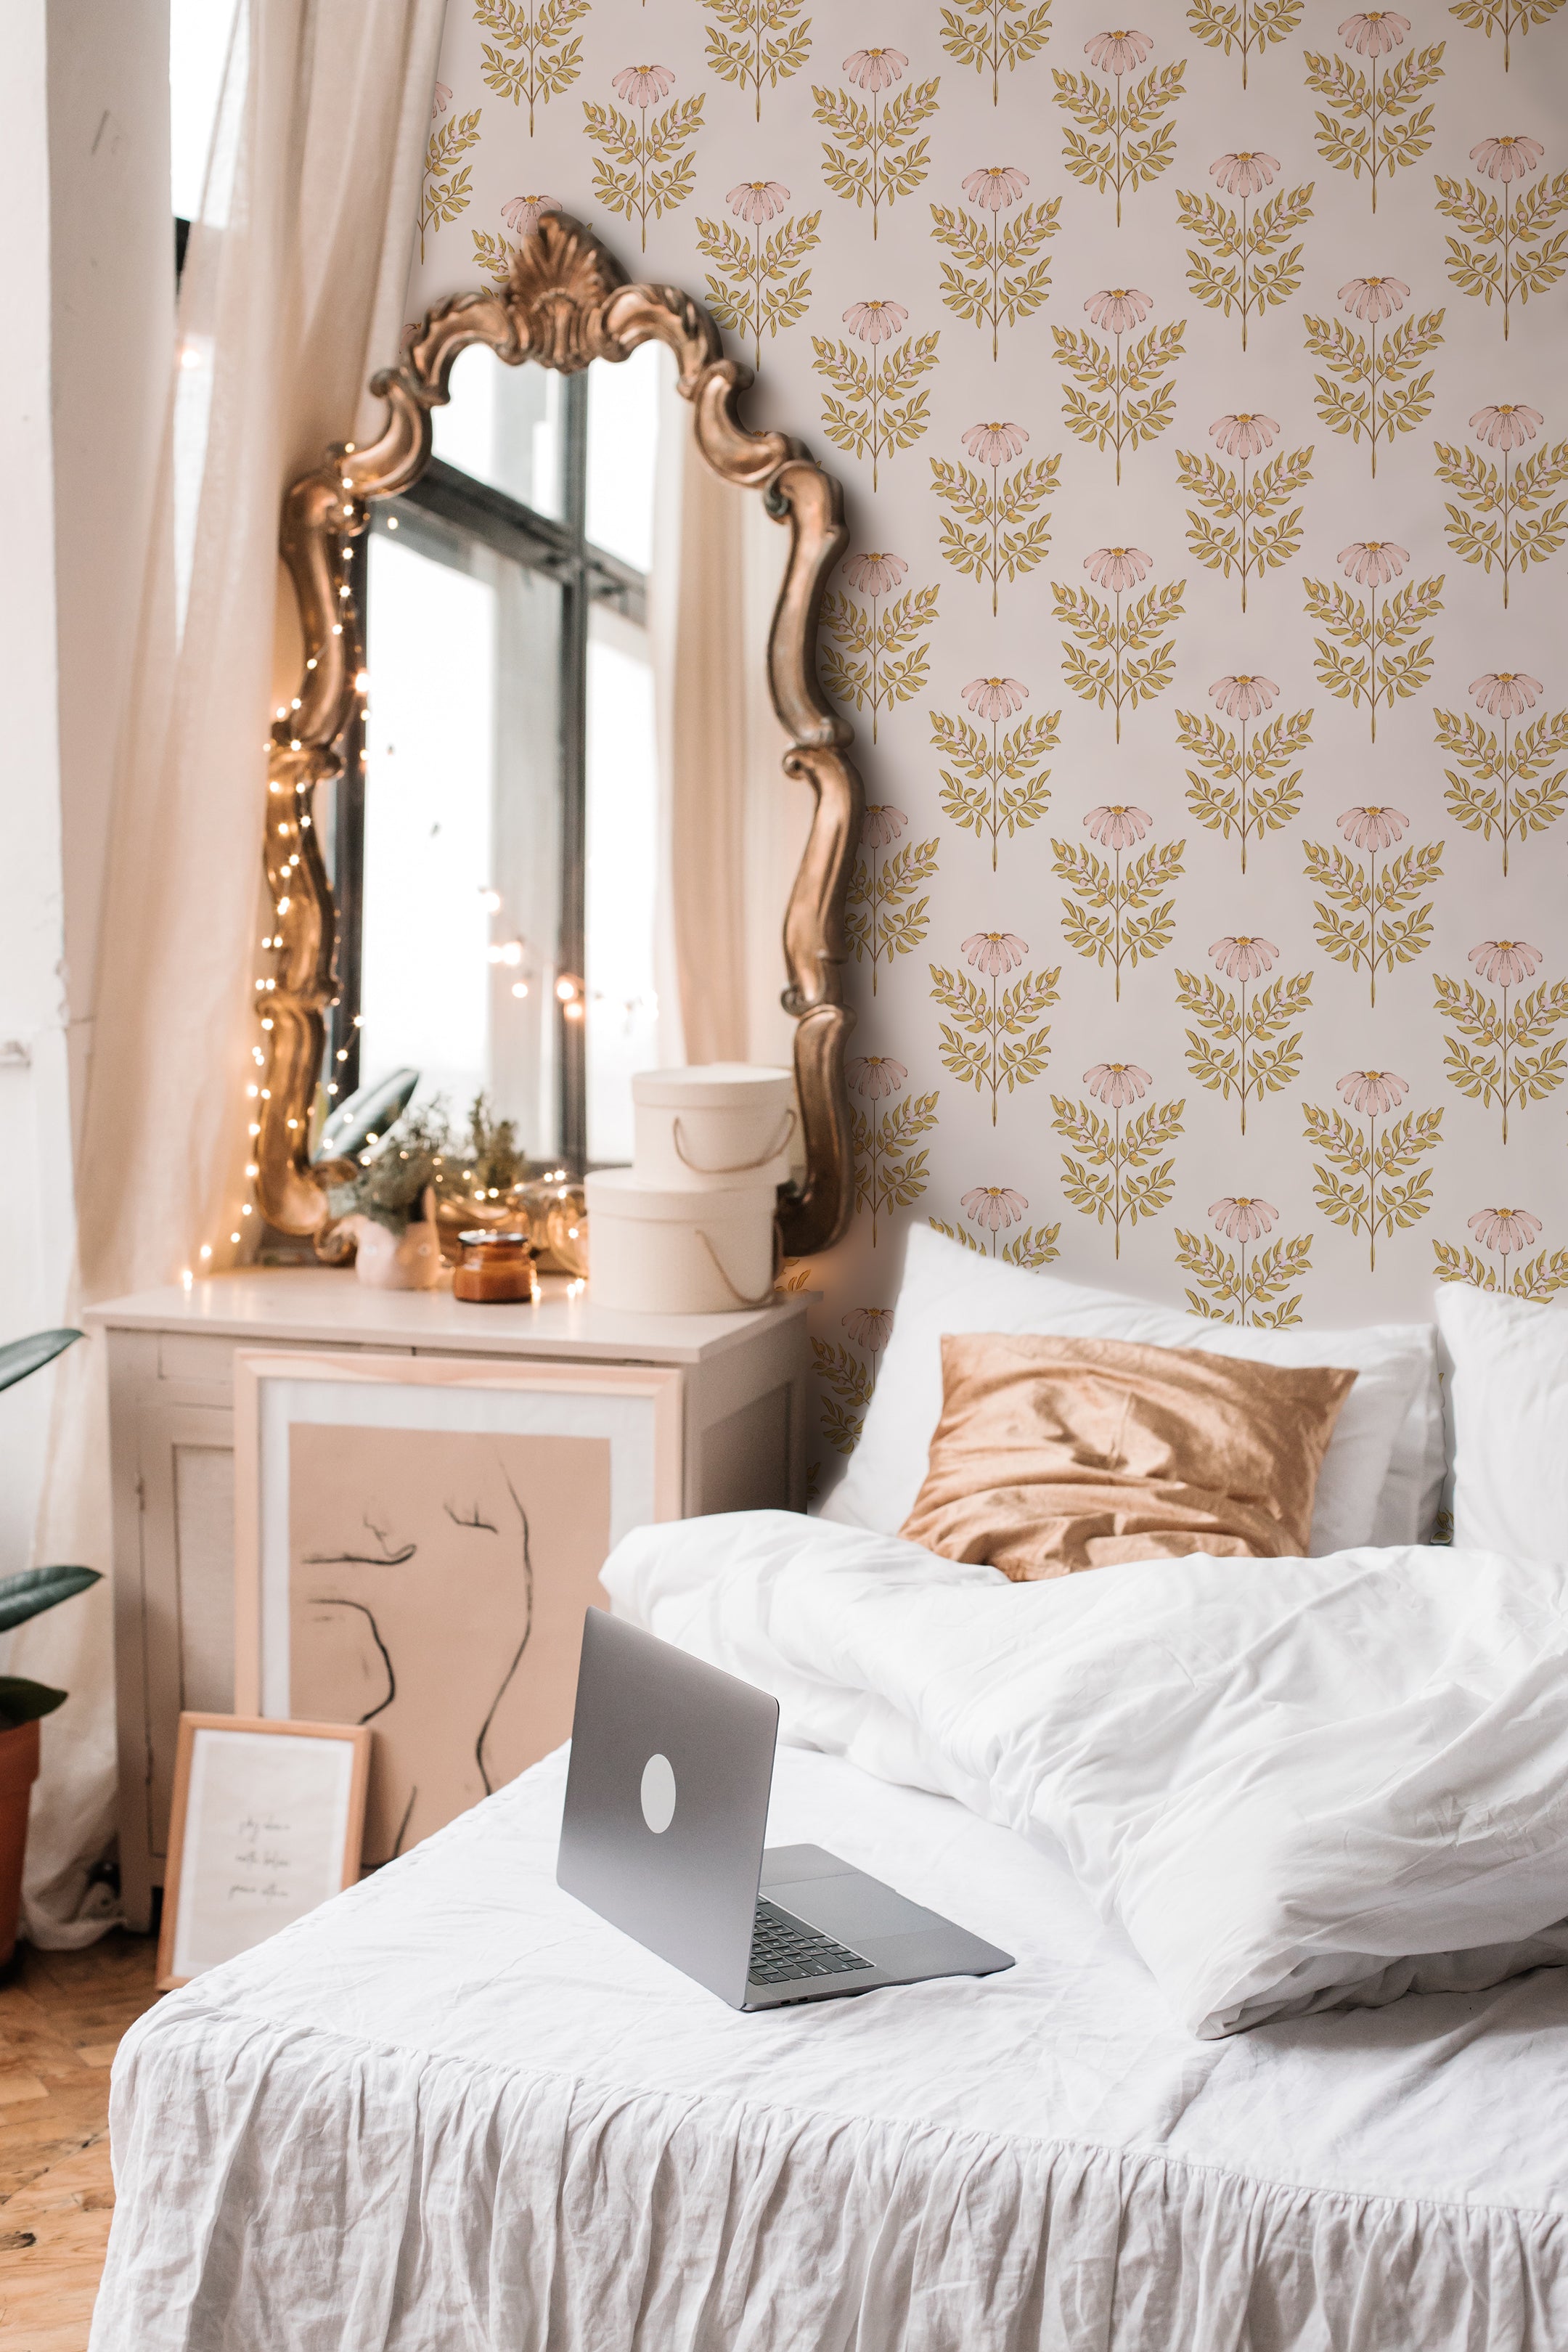 A serene and stylish bedroom featuring the Ditsy Daisy Wallpaper, adorned with delicate pink daisies and golden leaves on a pale background. The room includes a vintage gold-framed mirror, white bedding, and cozy decorative elements, creating a warm and inviting atmosphere.